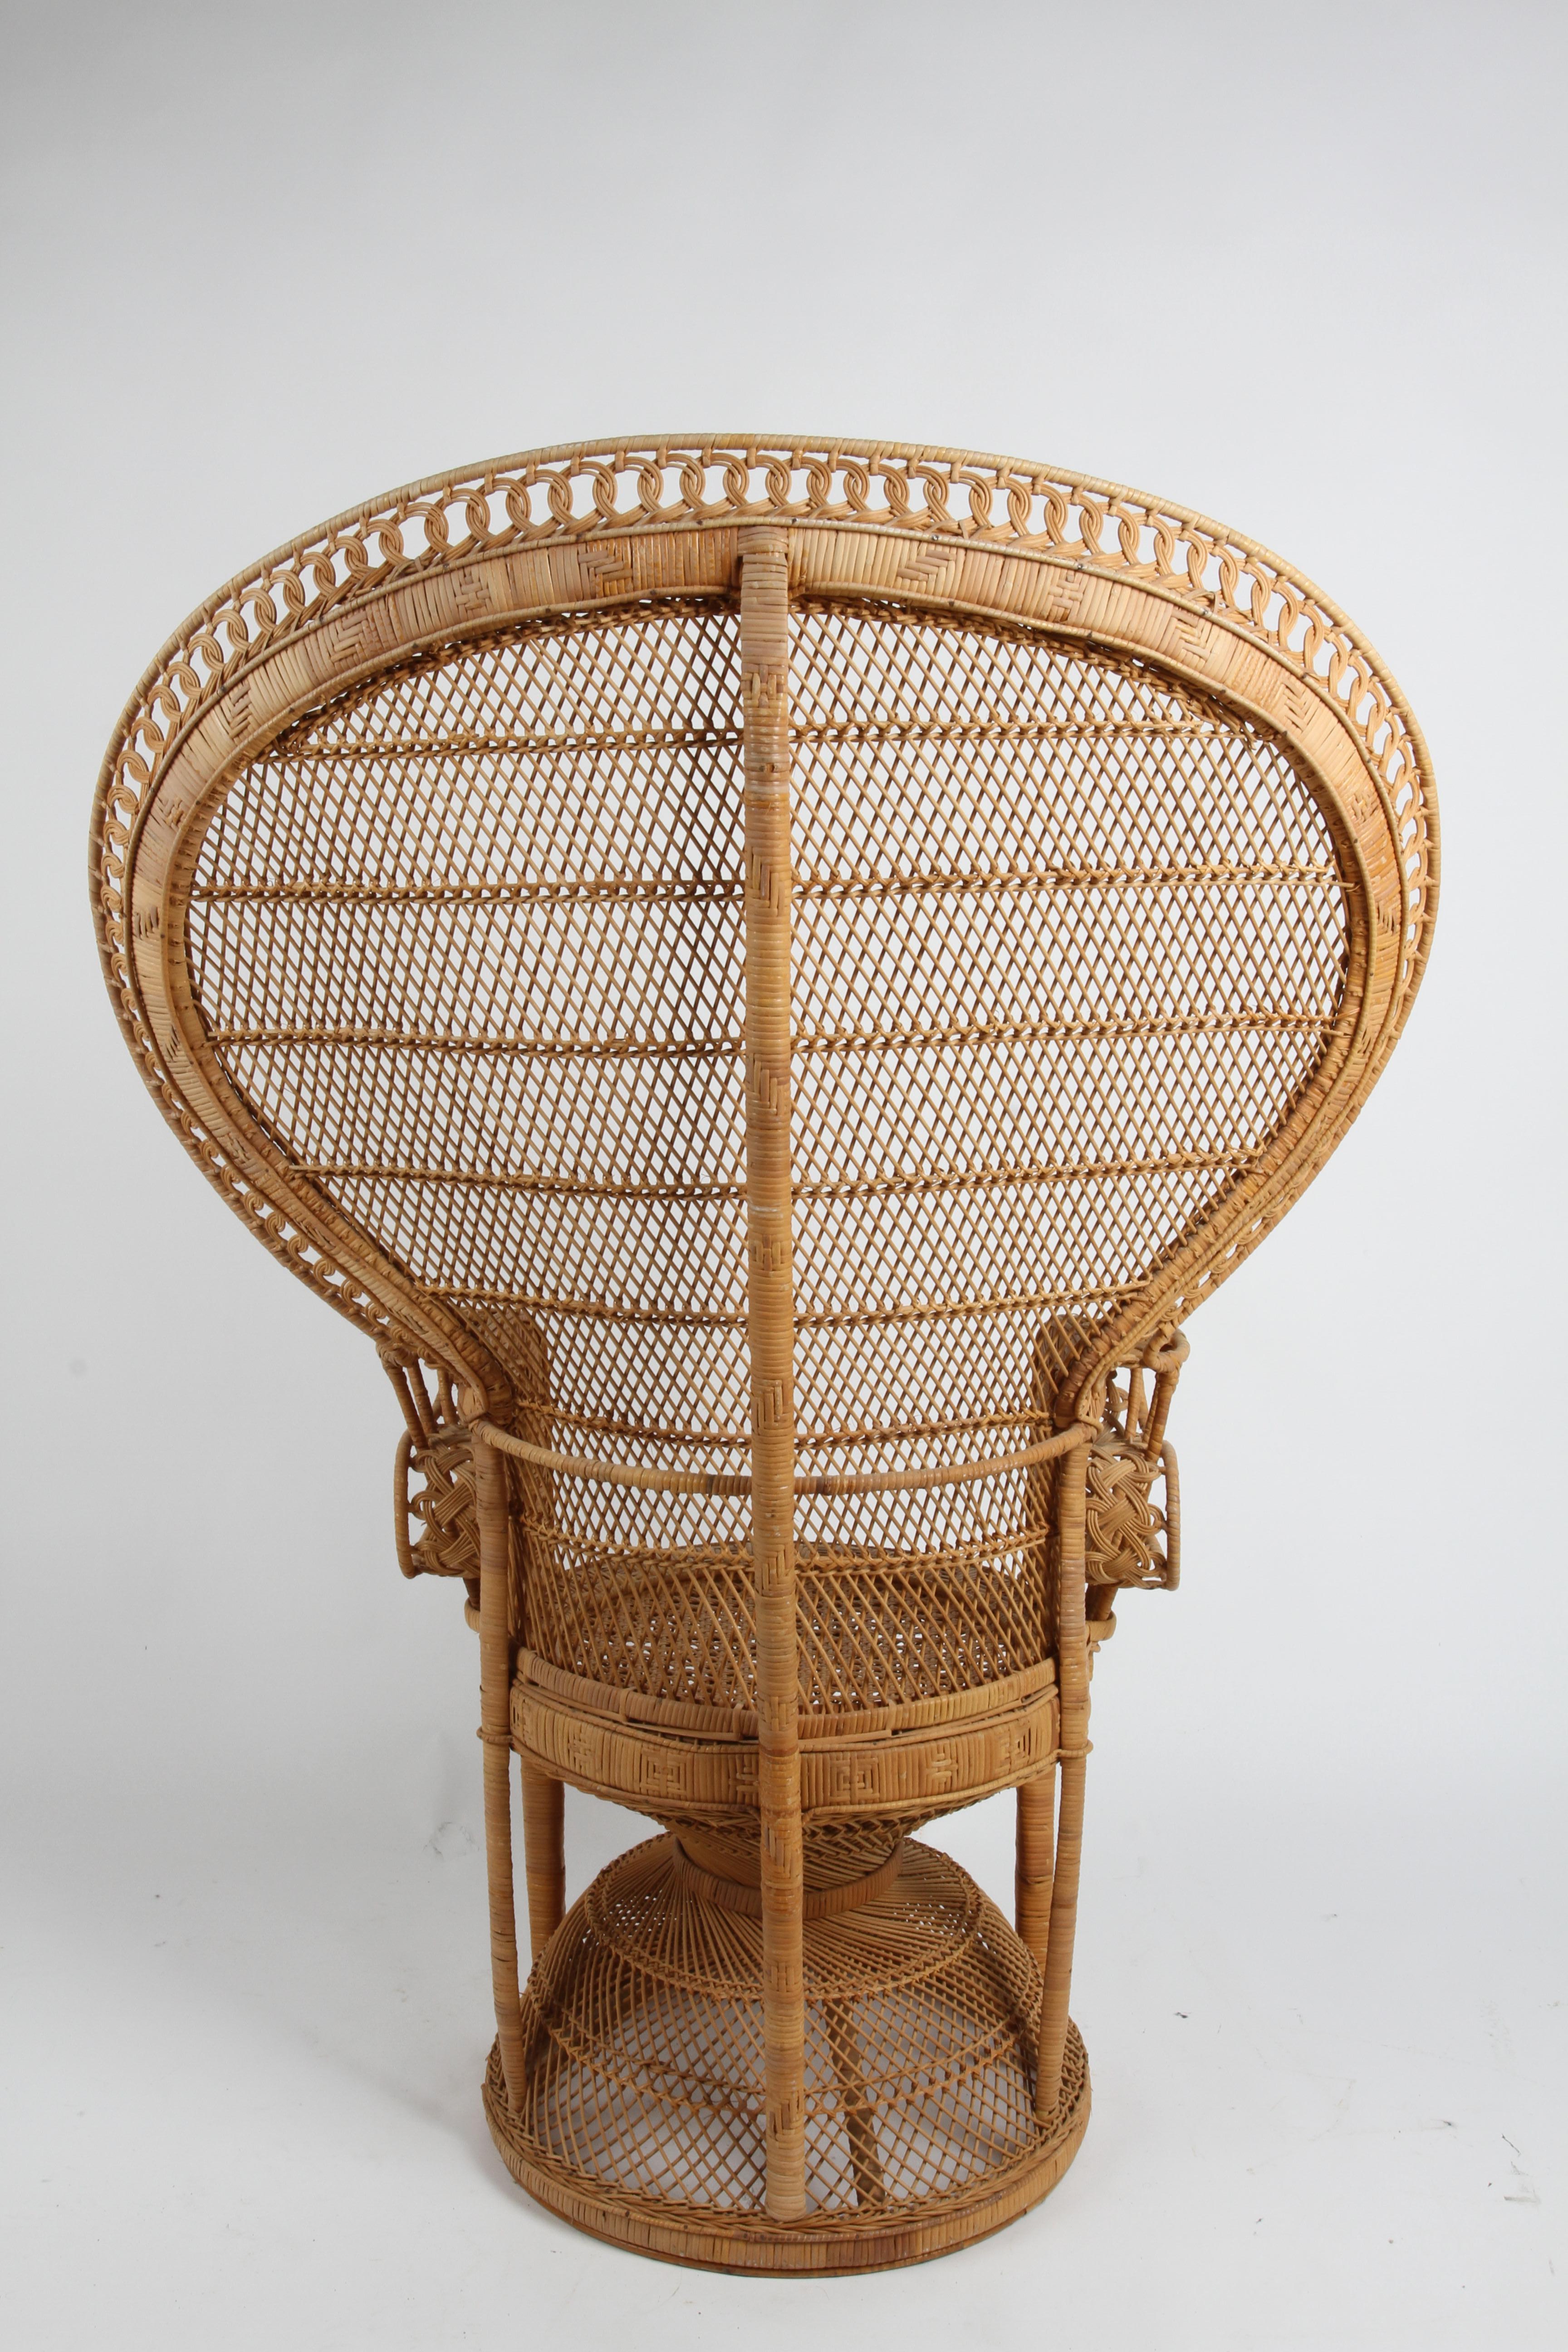 Vintage 1970s Rattan & Wicker Handcrafted Boho Chic Emmanuelle Peacock Chair 5